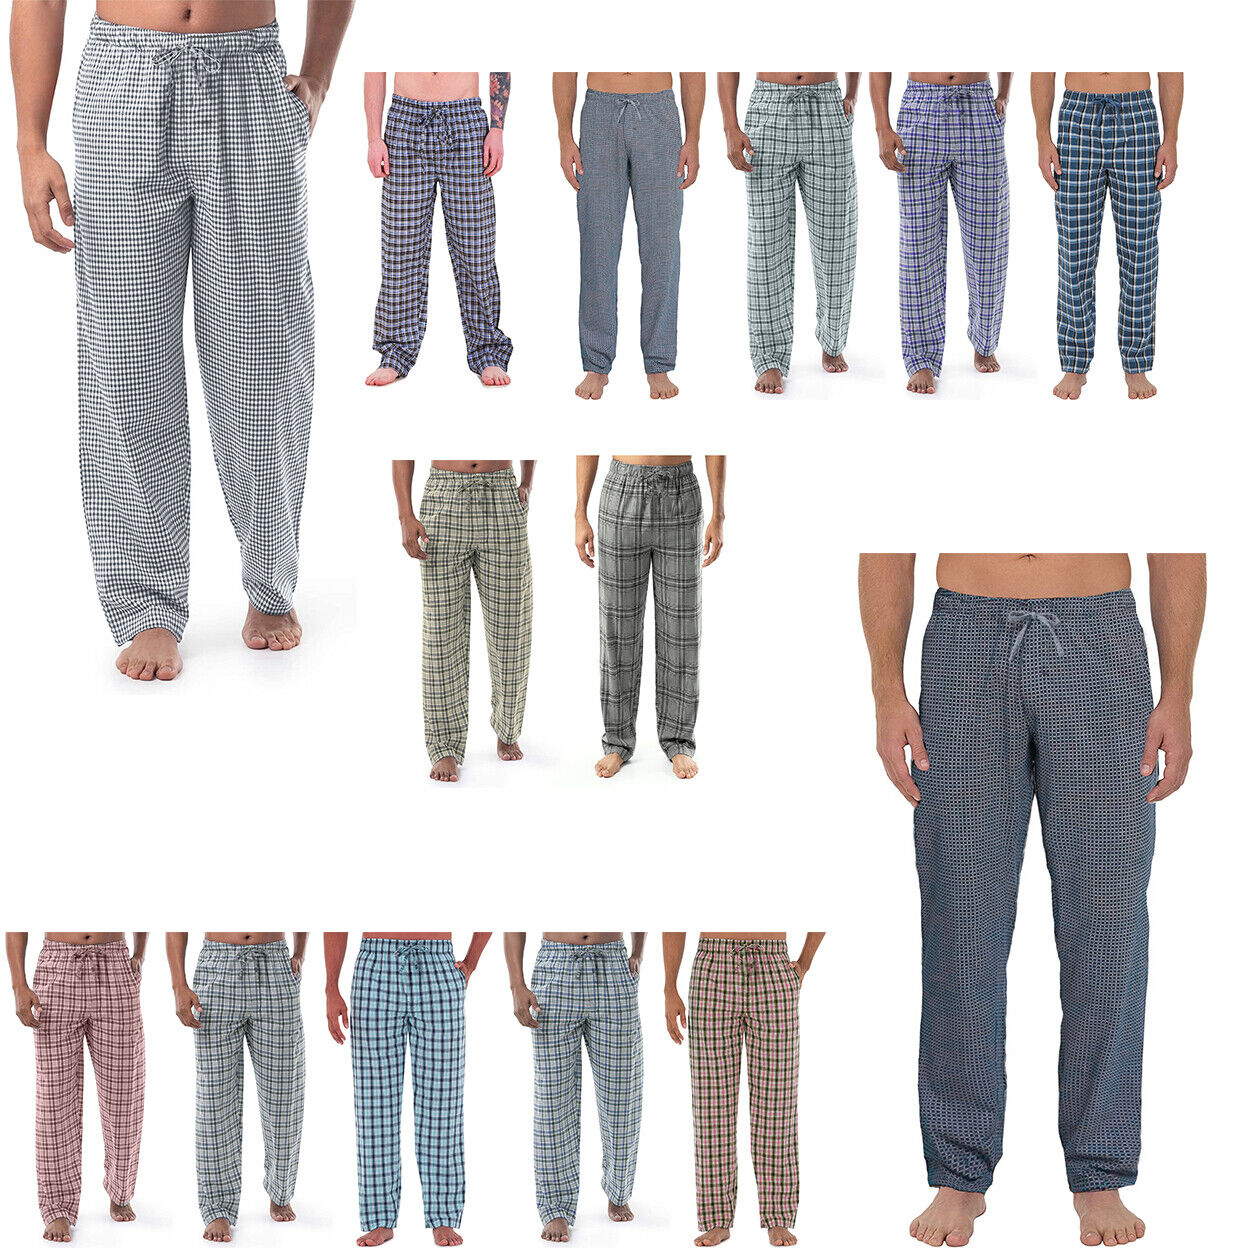 3-Pack: Men's Ultra-Soft Solid & Plaid Cotton Jersey Knit Comfy Sleep Lounge Pajama Pants - Solid, Small